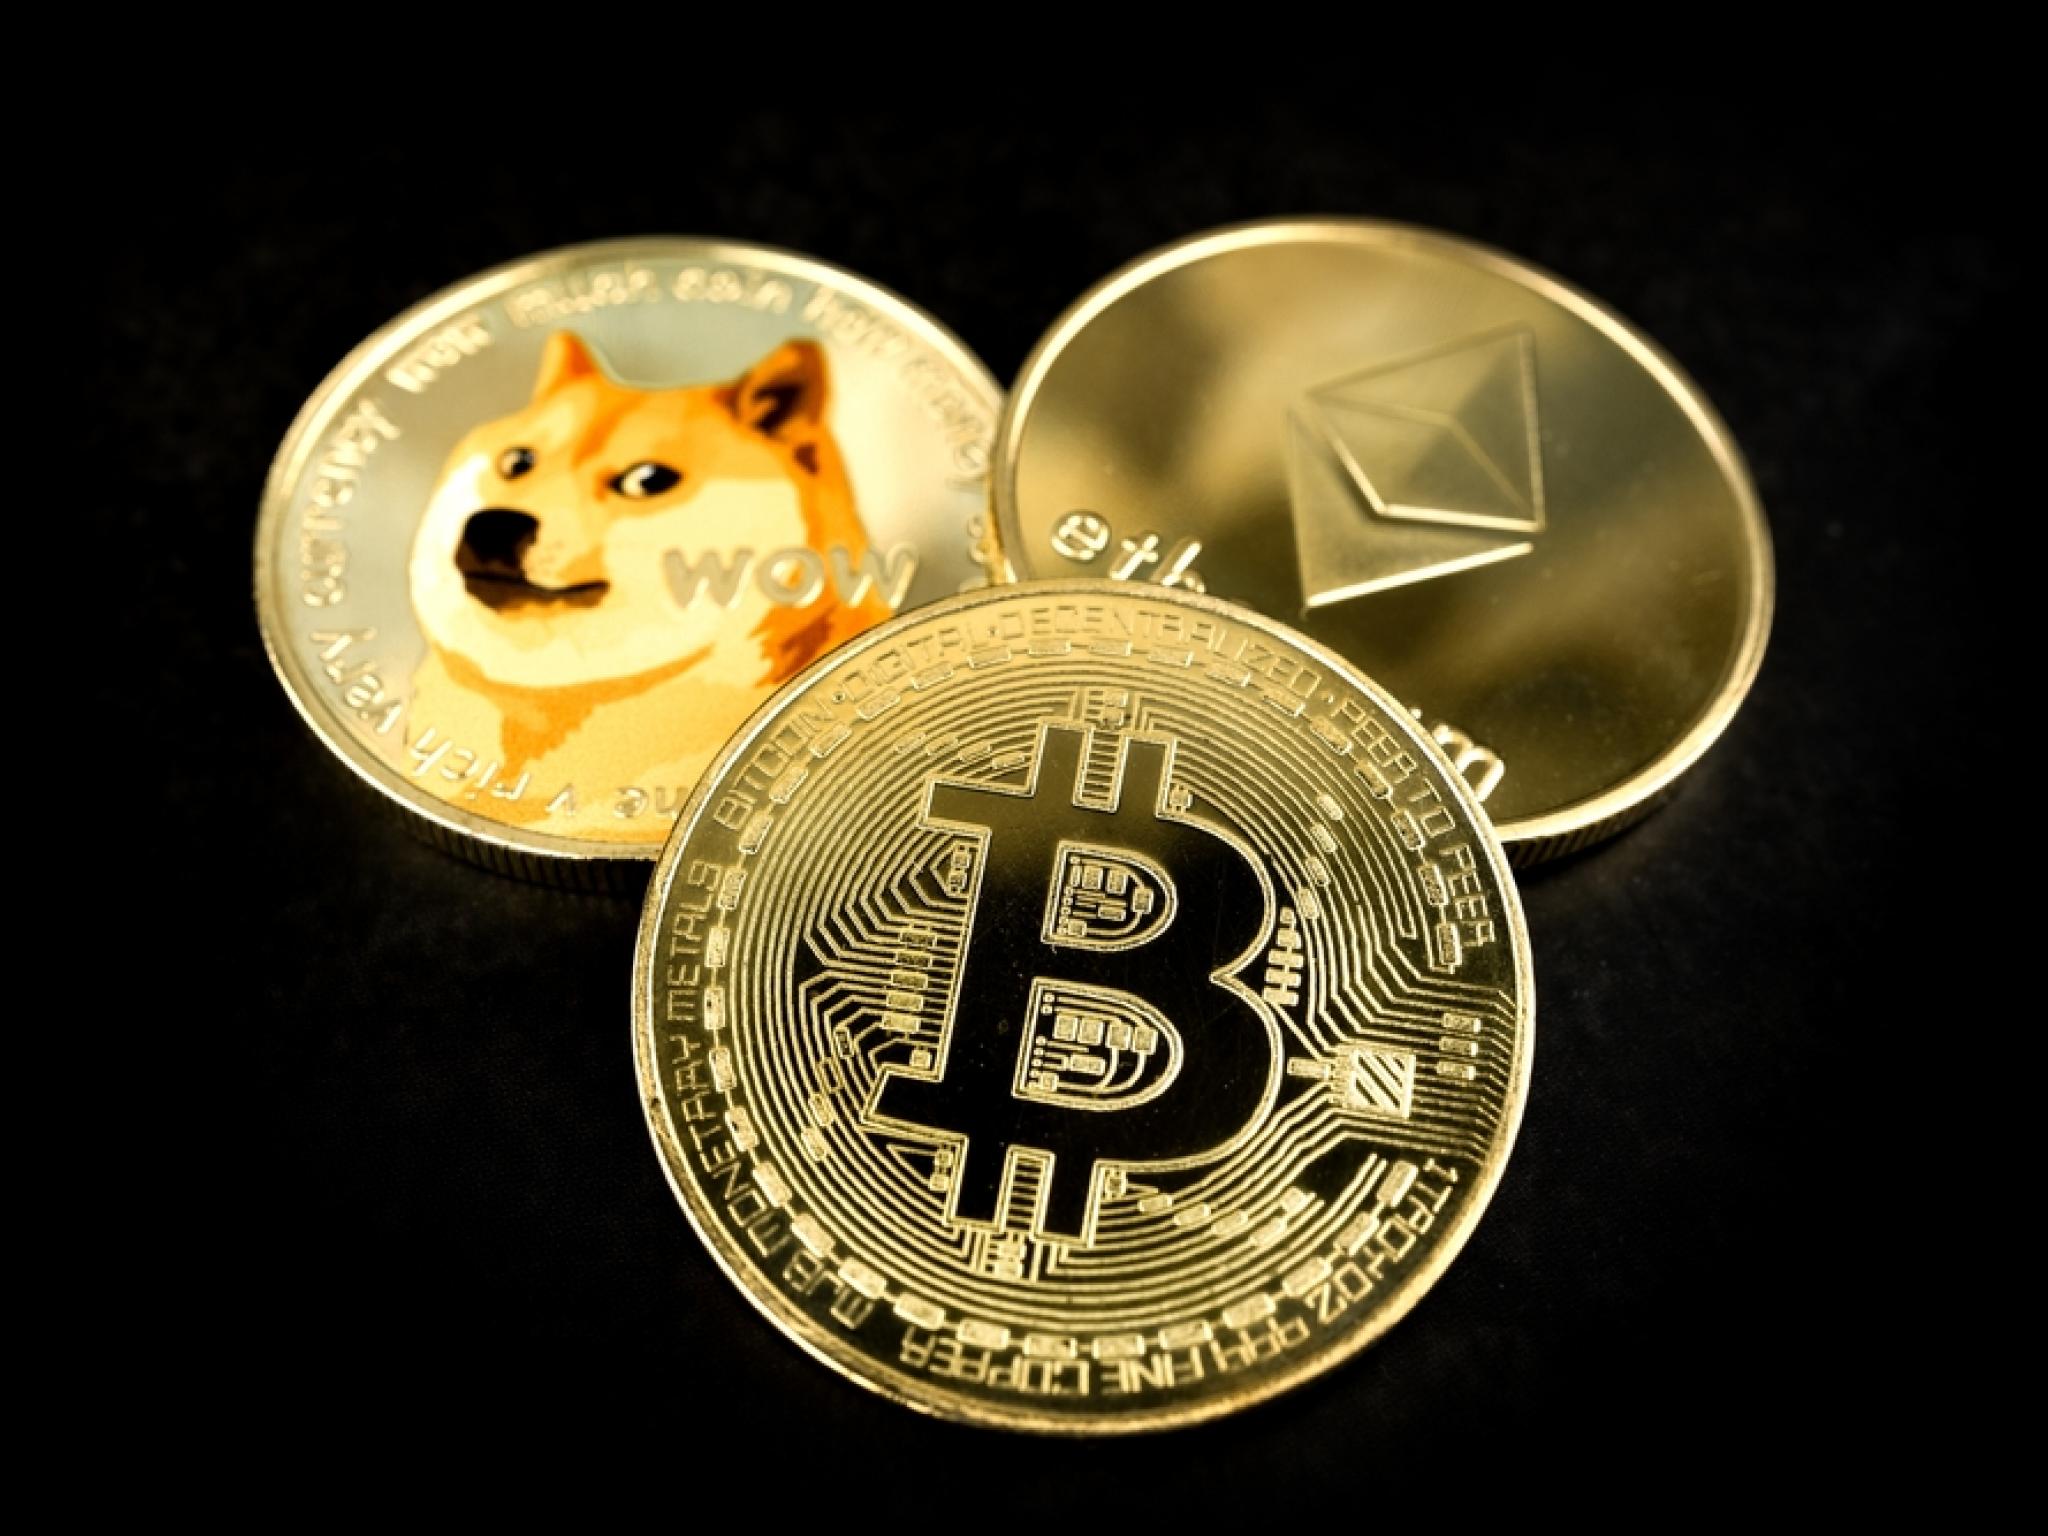  bitcoin-ethereum-dogecoin-decline-ahead-of-fridays-jobs-reportanalyst-predicts-king-crypto-could-surge-over-278-to-256k 